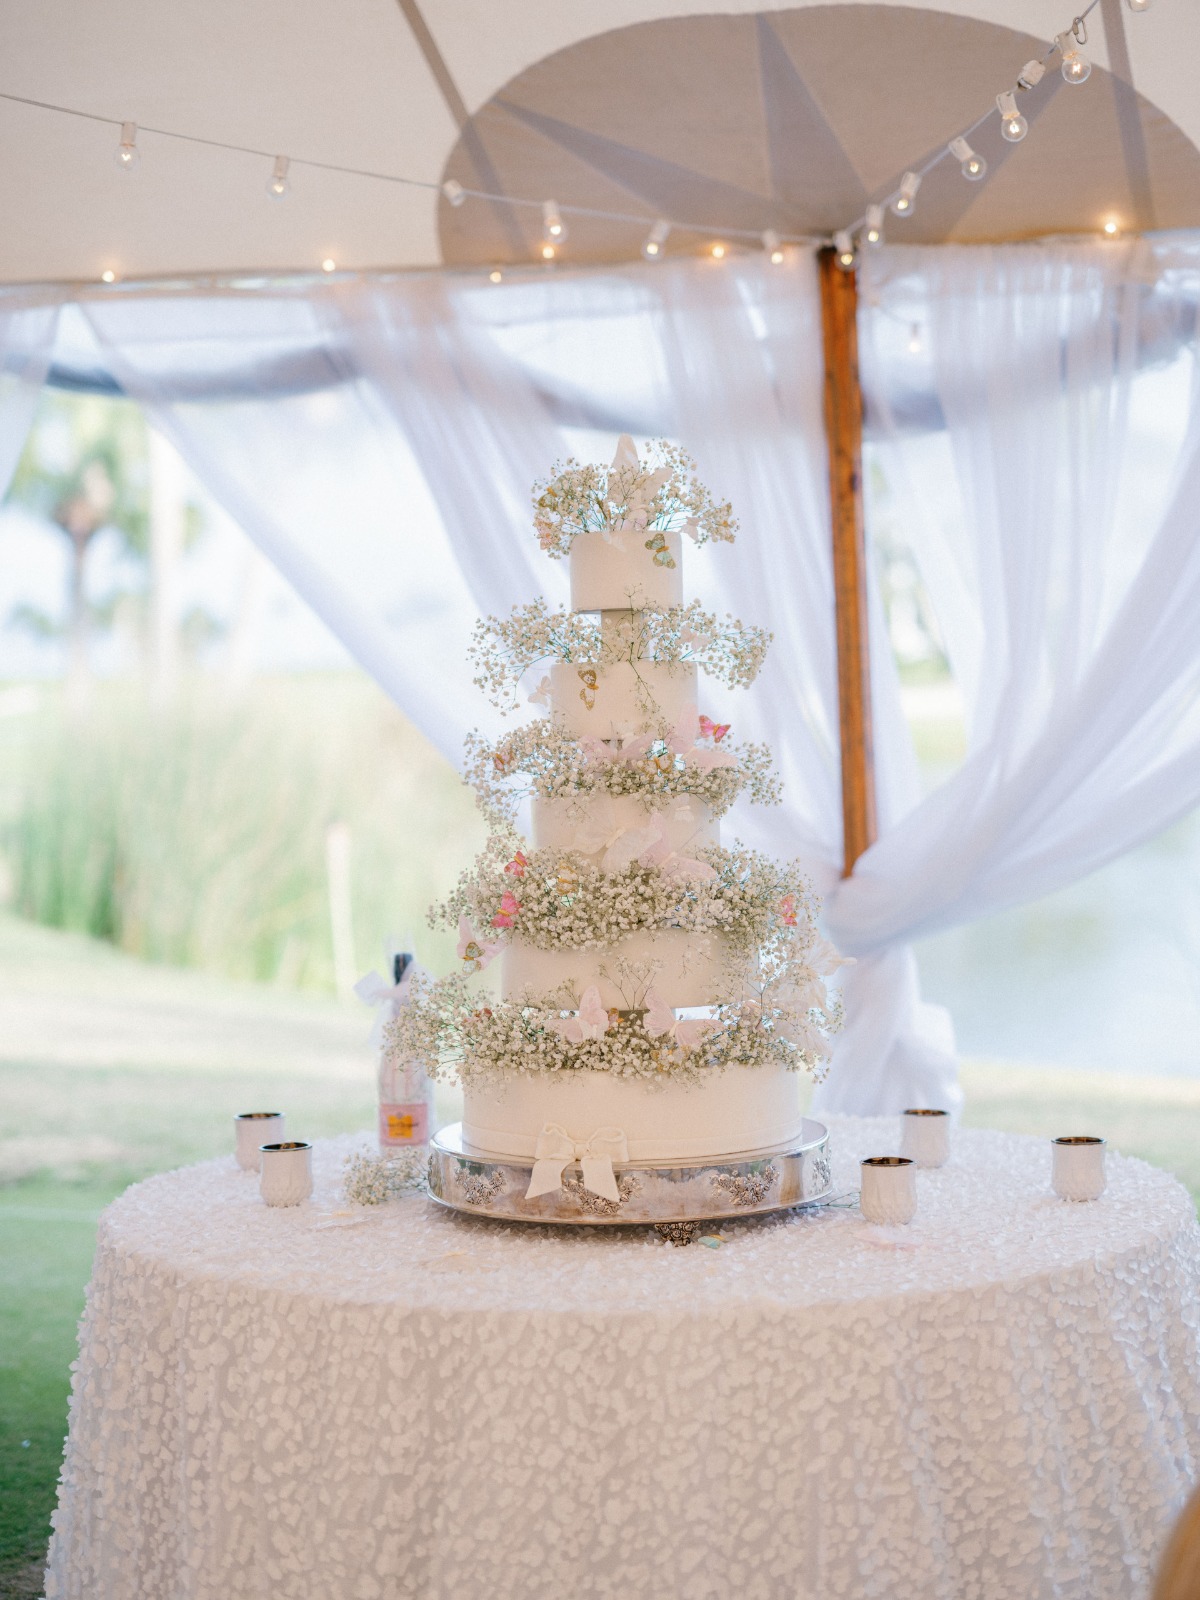 Wedding cake accented with baby's breath and roses